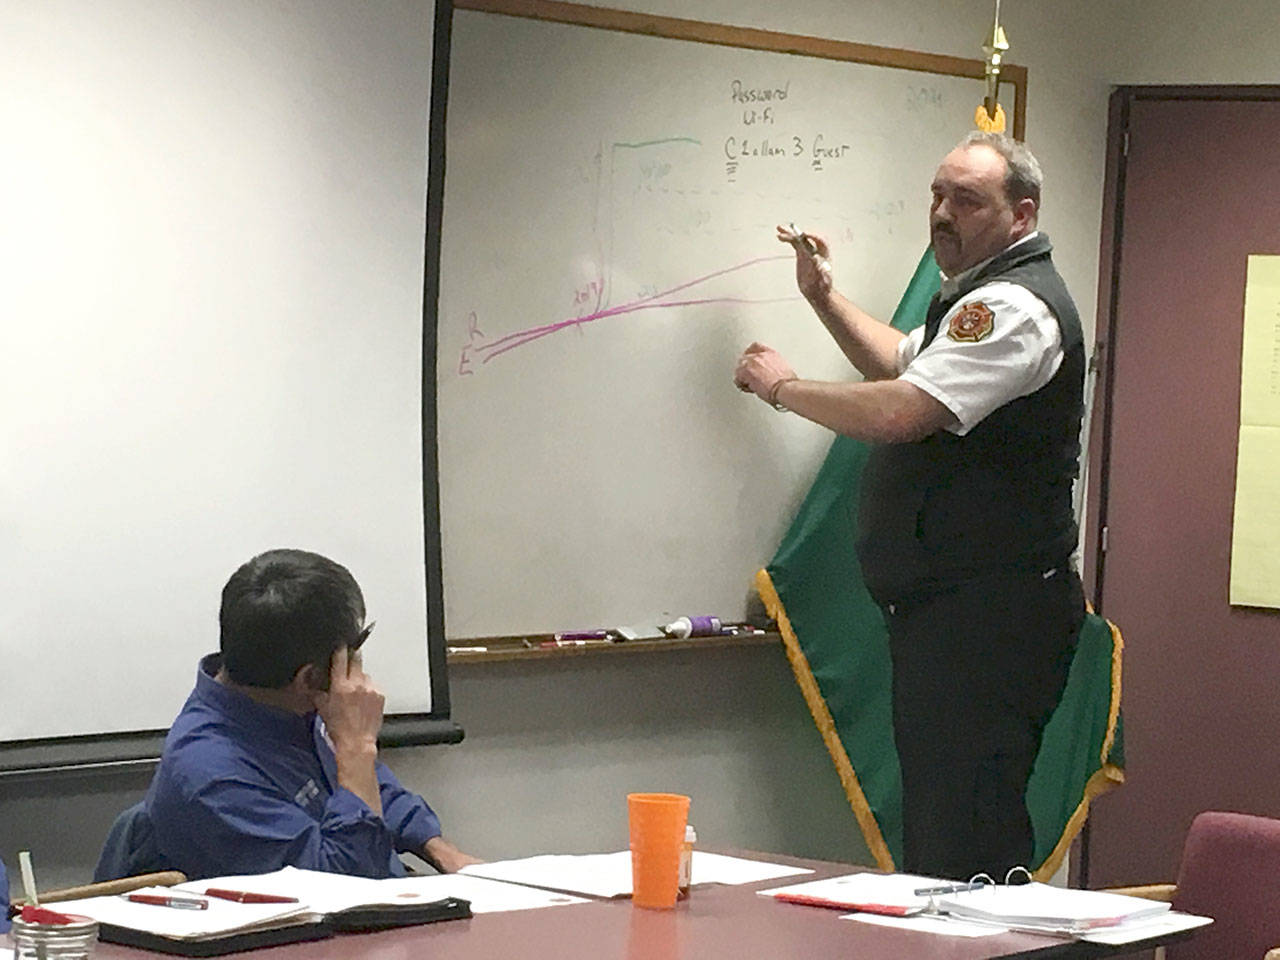 Fire chief Ben Andrews for Clallam County District 3 speaks with fire commissioners Nov. 21 about the district’s finances going forward. Currently, the district is investigating a levy lid lift for voters in November 2018. (Matthew Nash/Olympic Peninsula News Group)